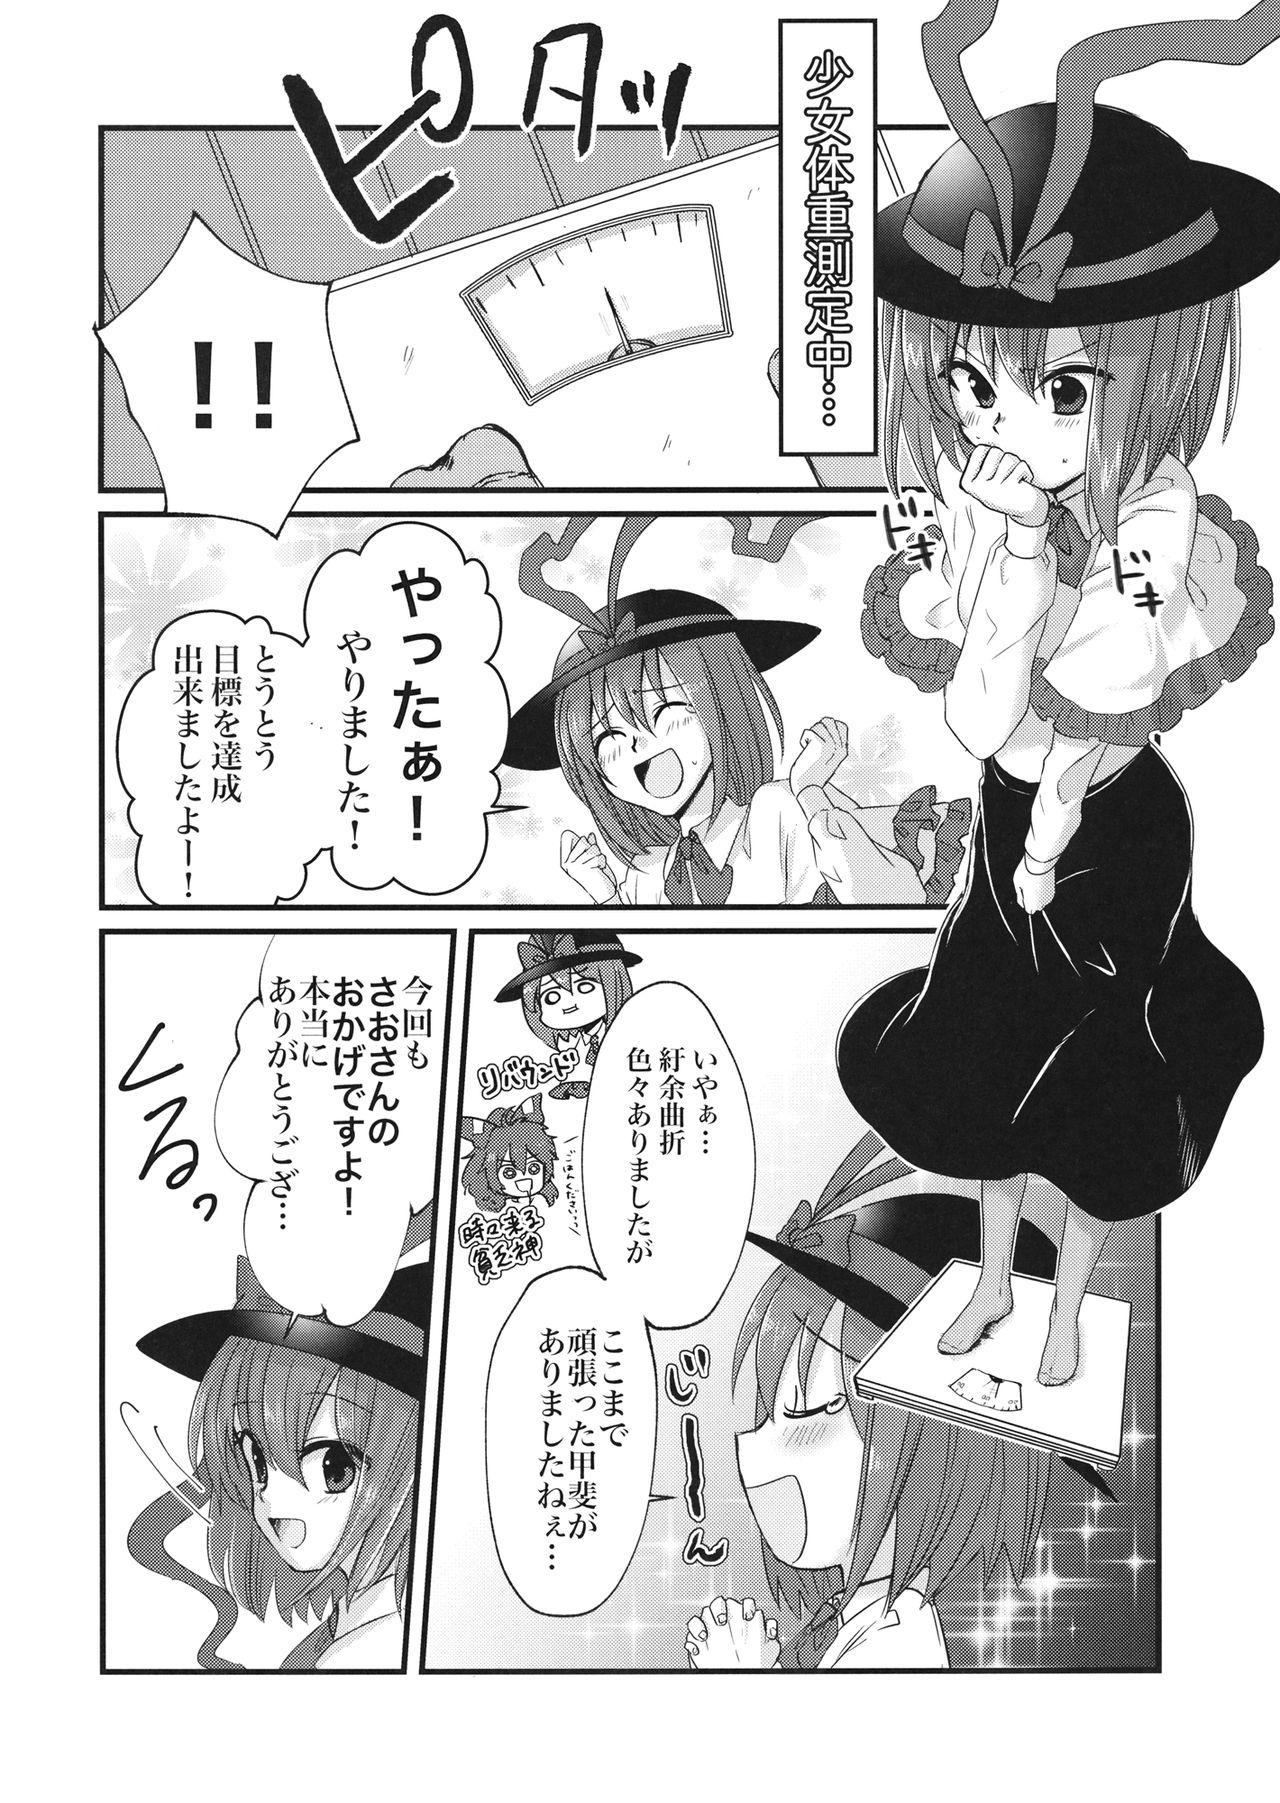 Culo 衣玖さんと一緒に色々頑張る本 - Touhou project Girls Getting Fucked - Page 3